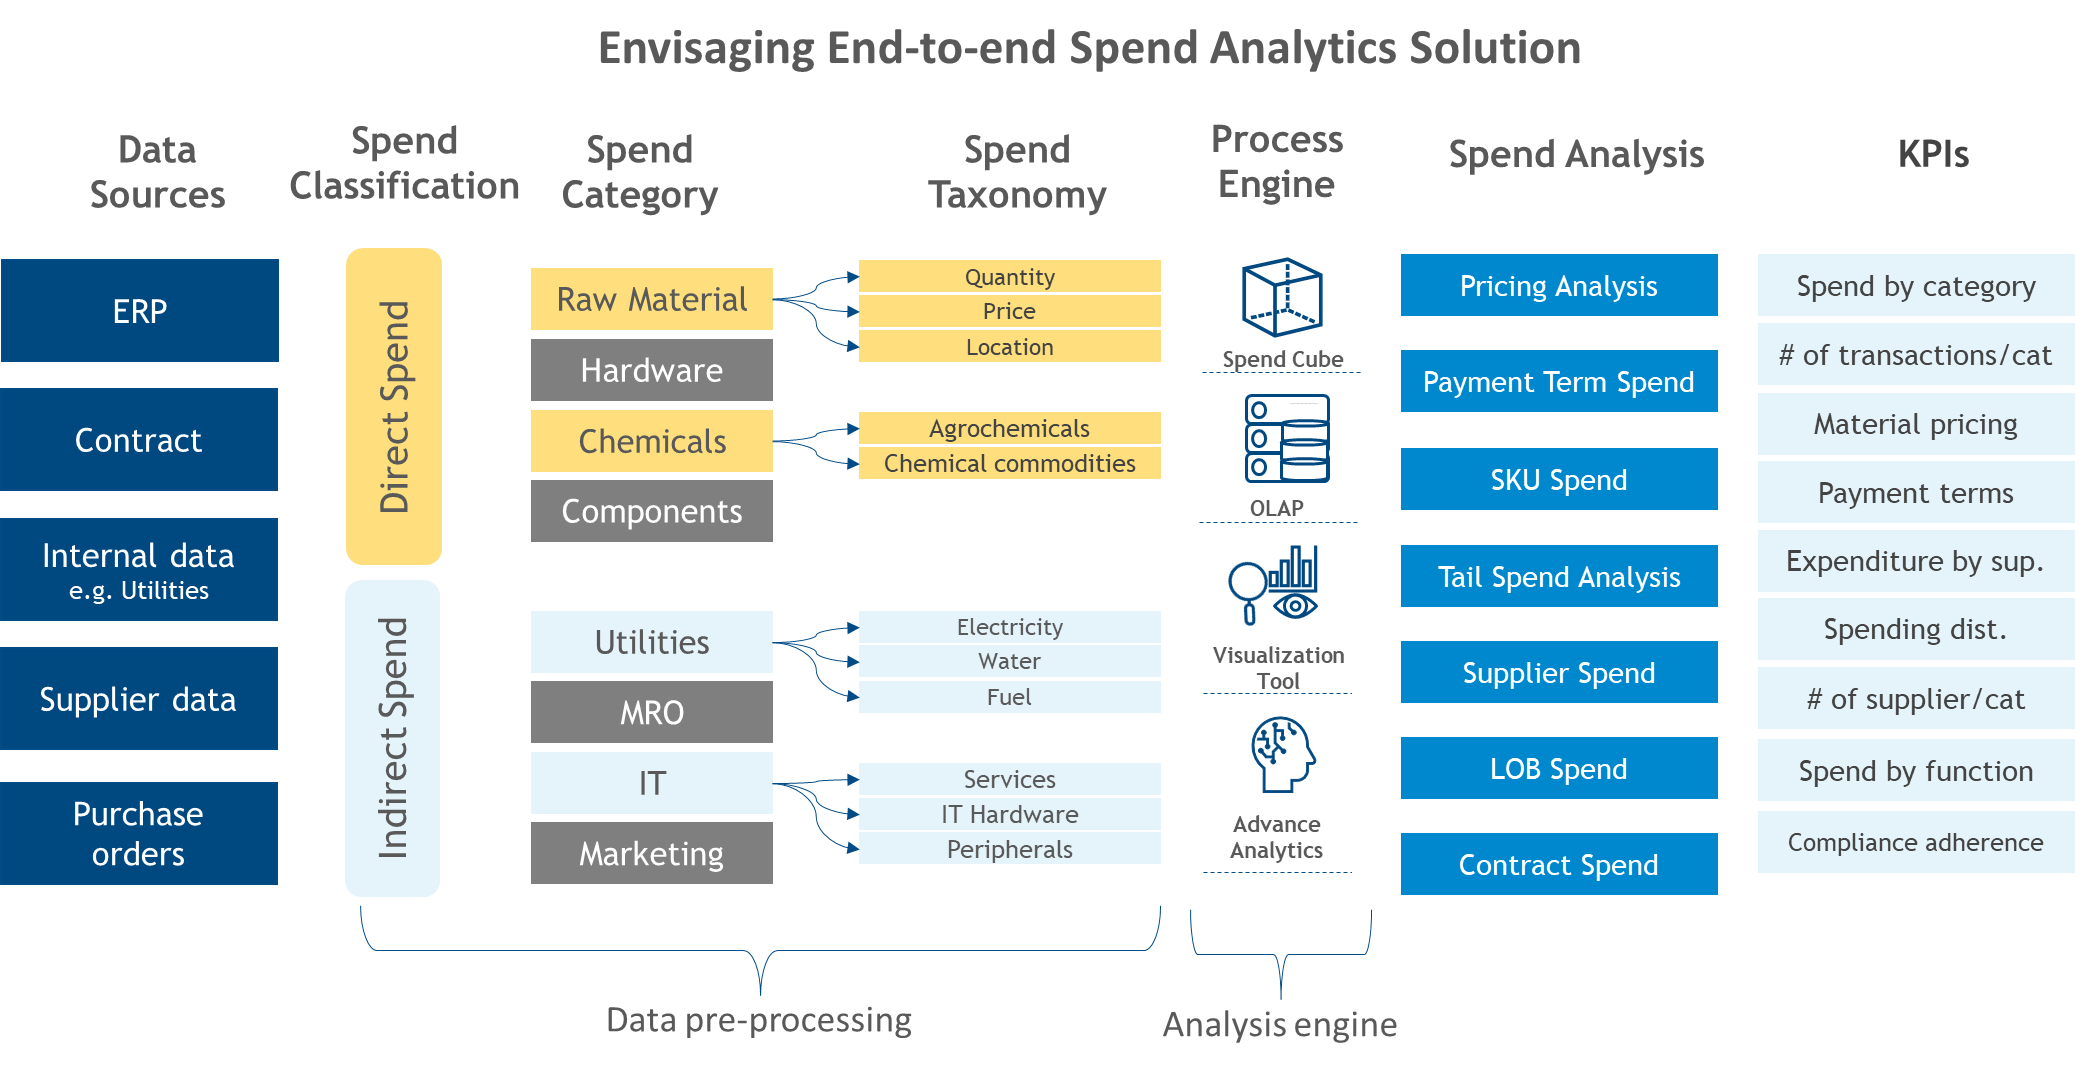 An illustration to explain how a spend analytics solution could be envisaged